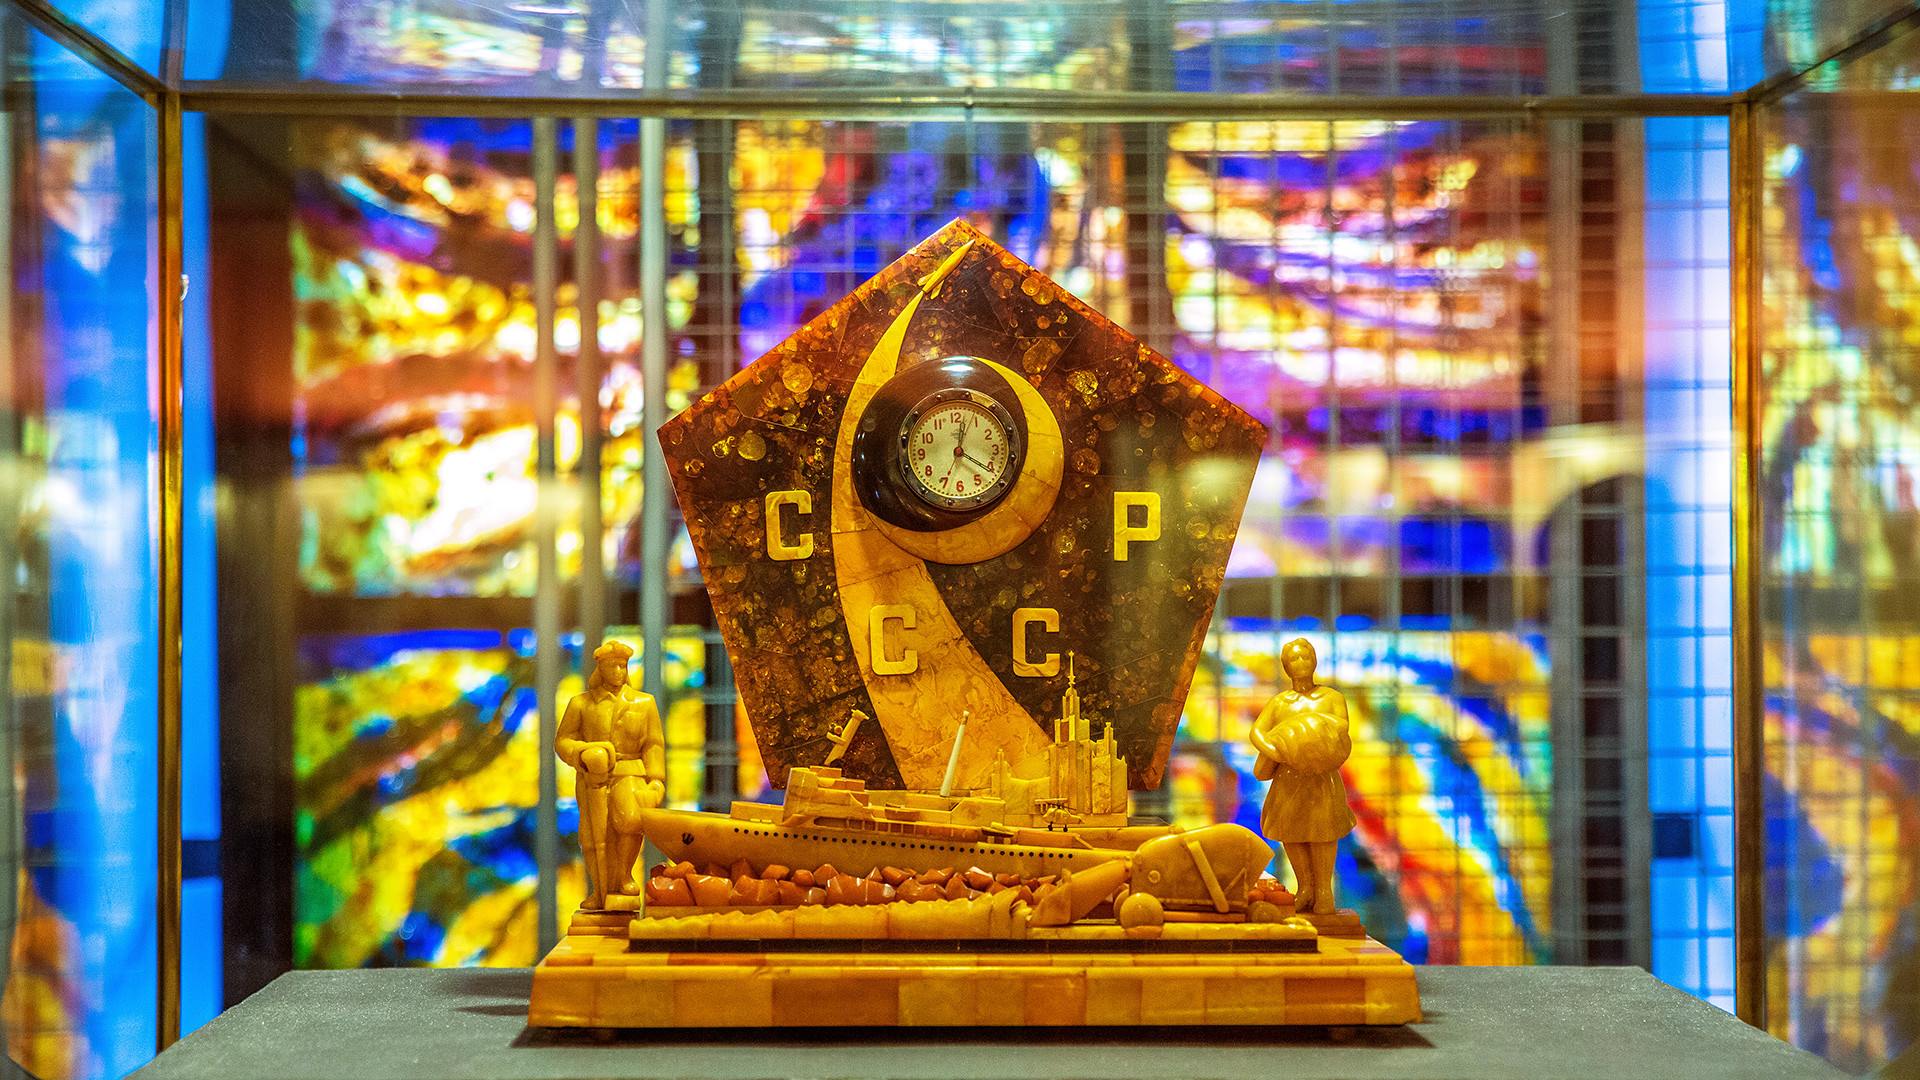 'Epoch' clock at the Amber Museum